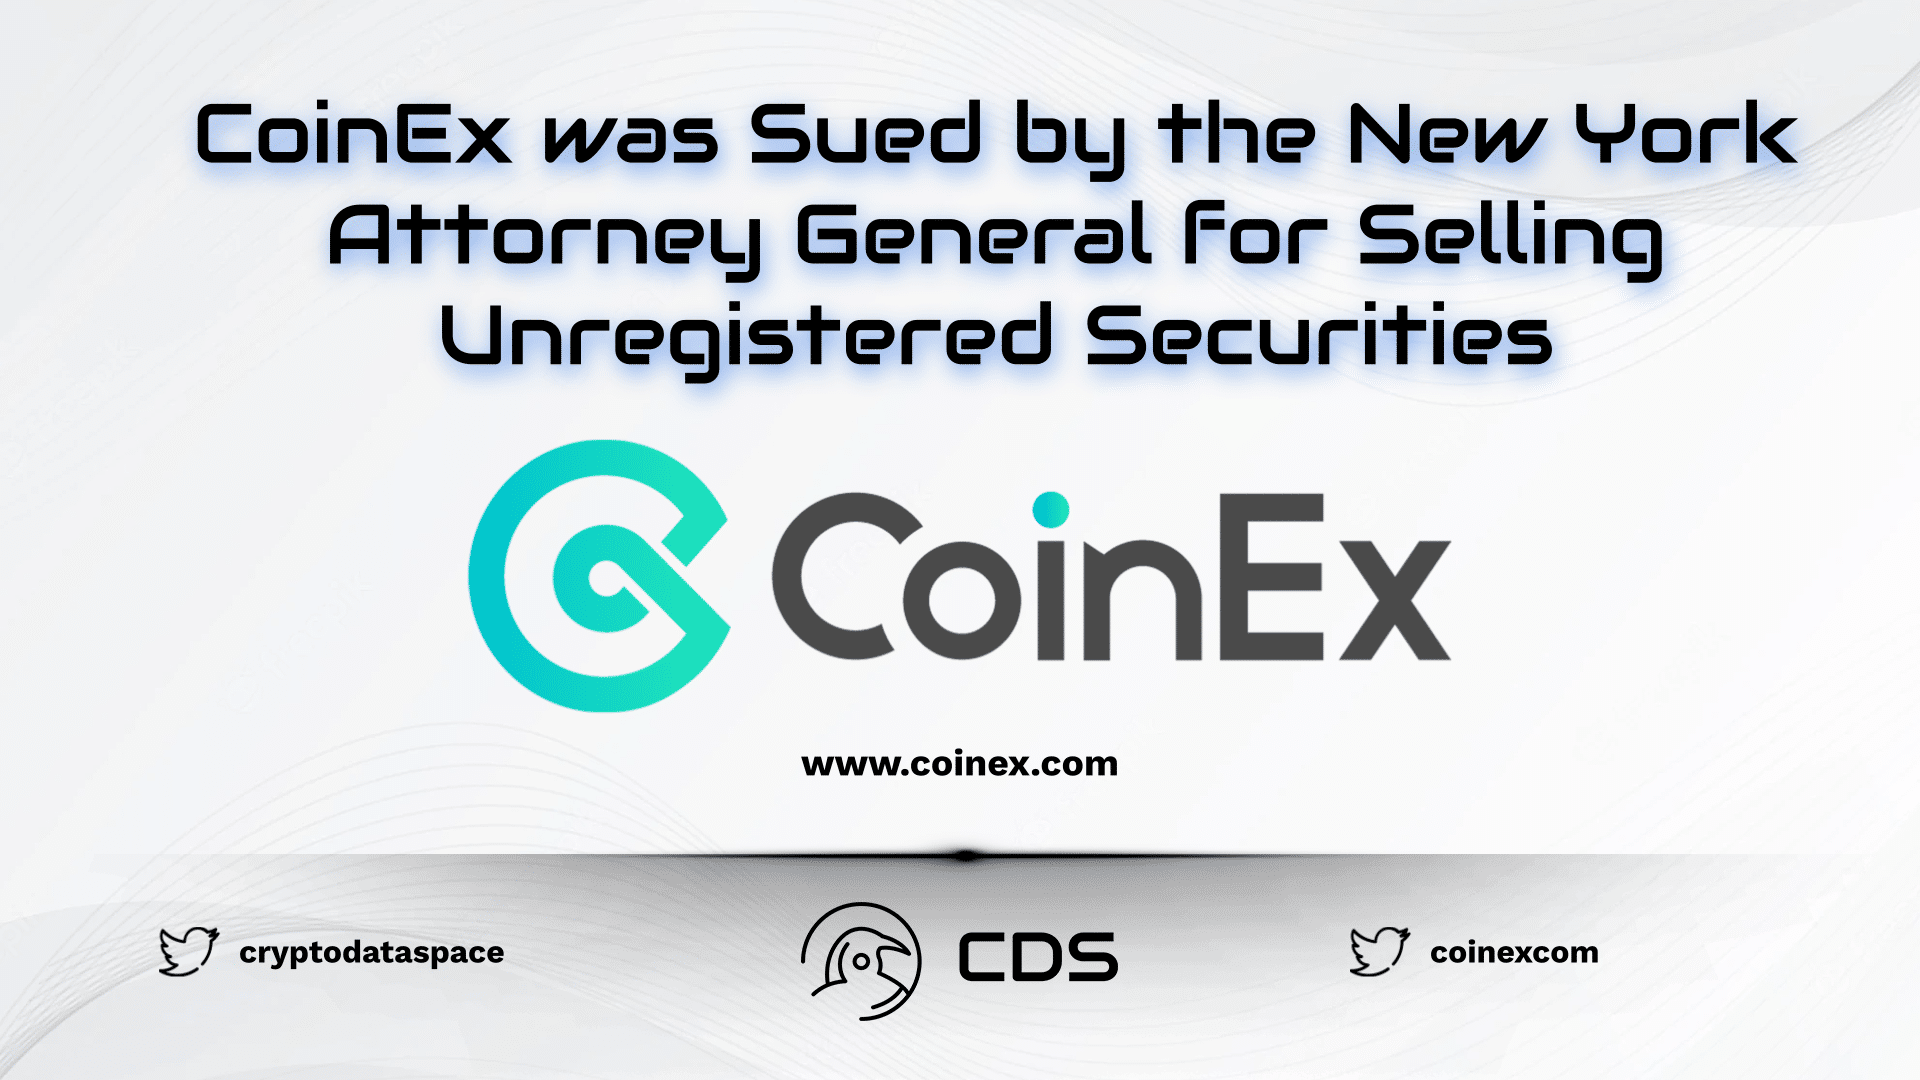 CoinEx was Sued by the New York Attorney General for Selling Unregistered Securities